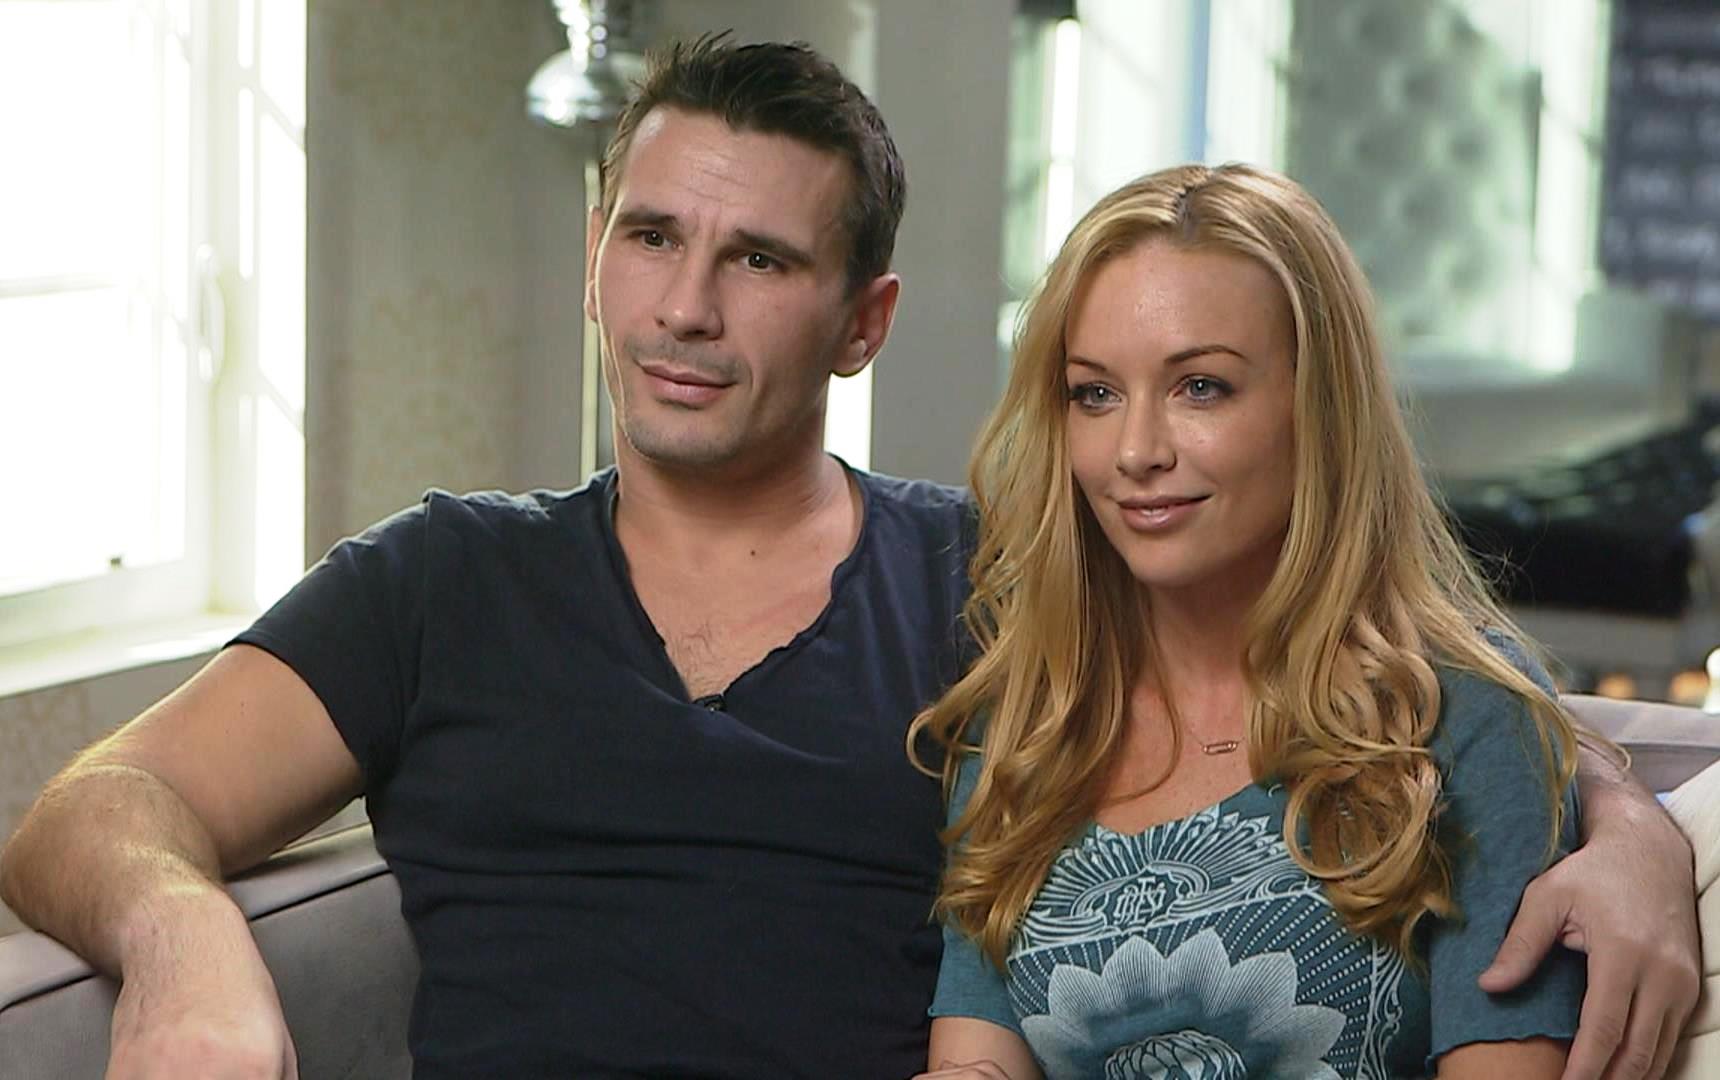 Manuel Ferrara, Kayden Kross porn-family marriage advice The New York News picture picture